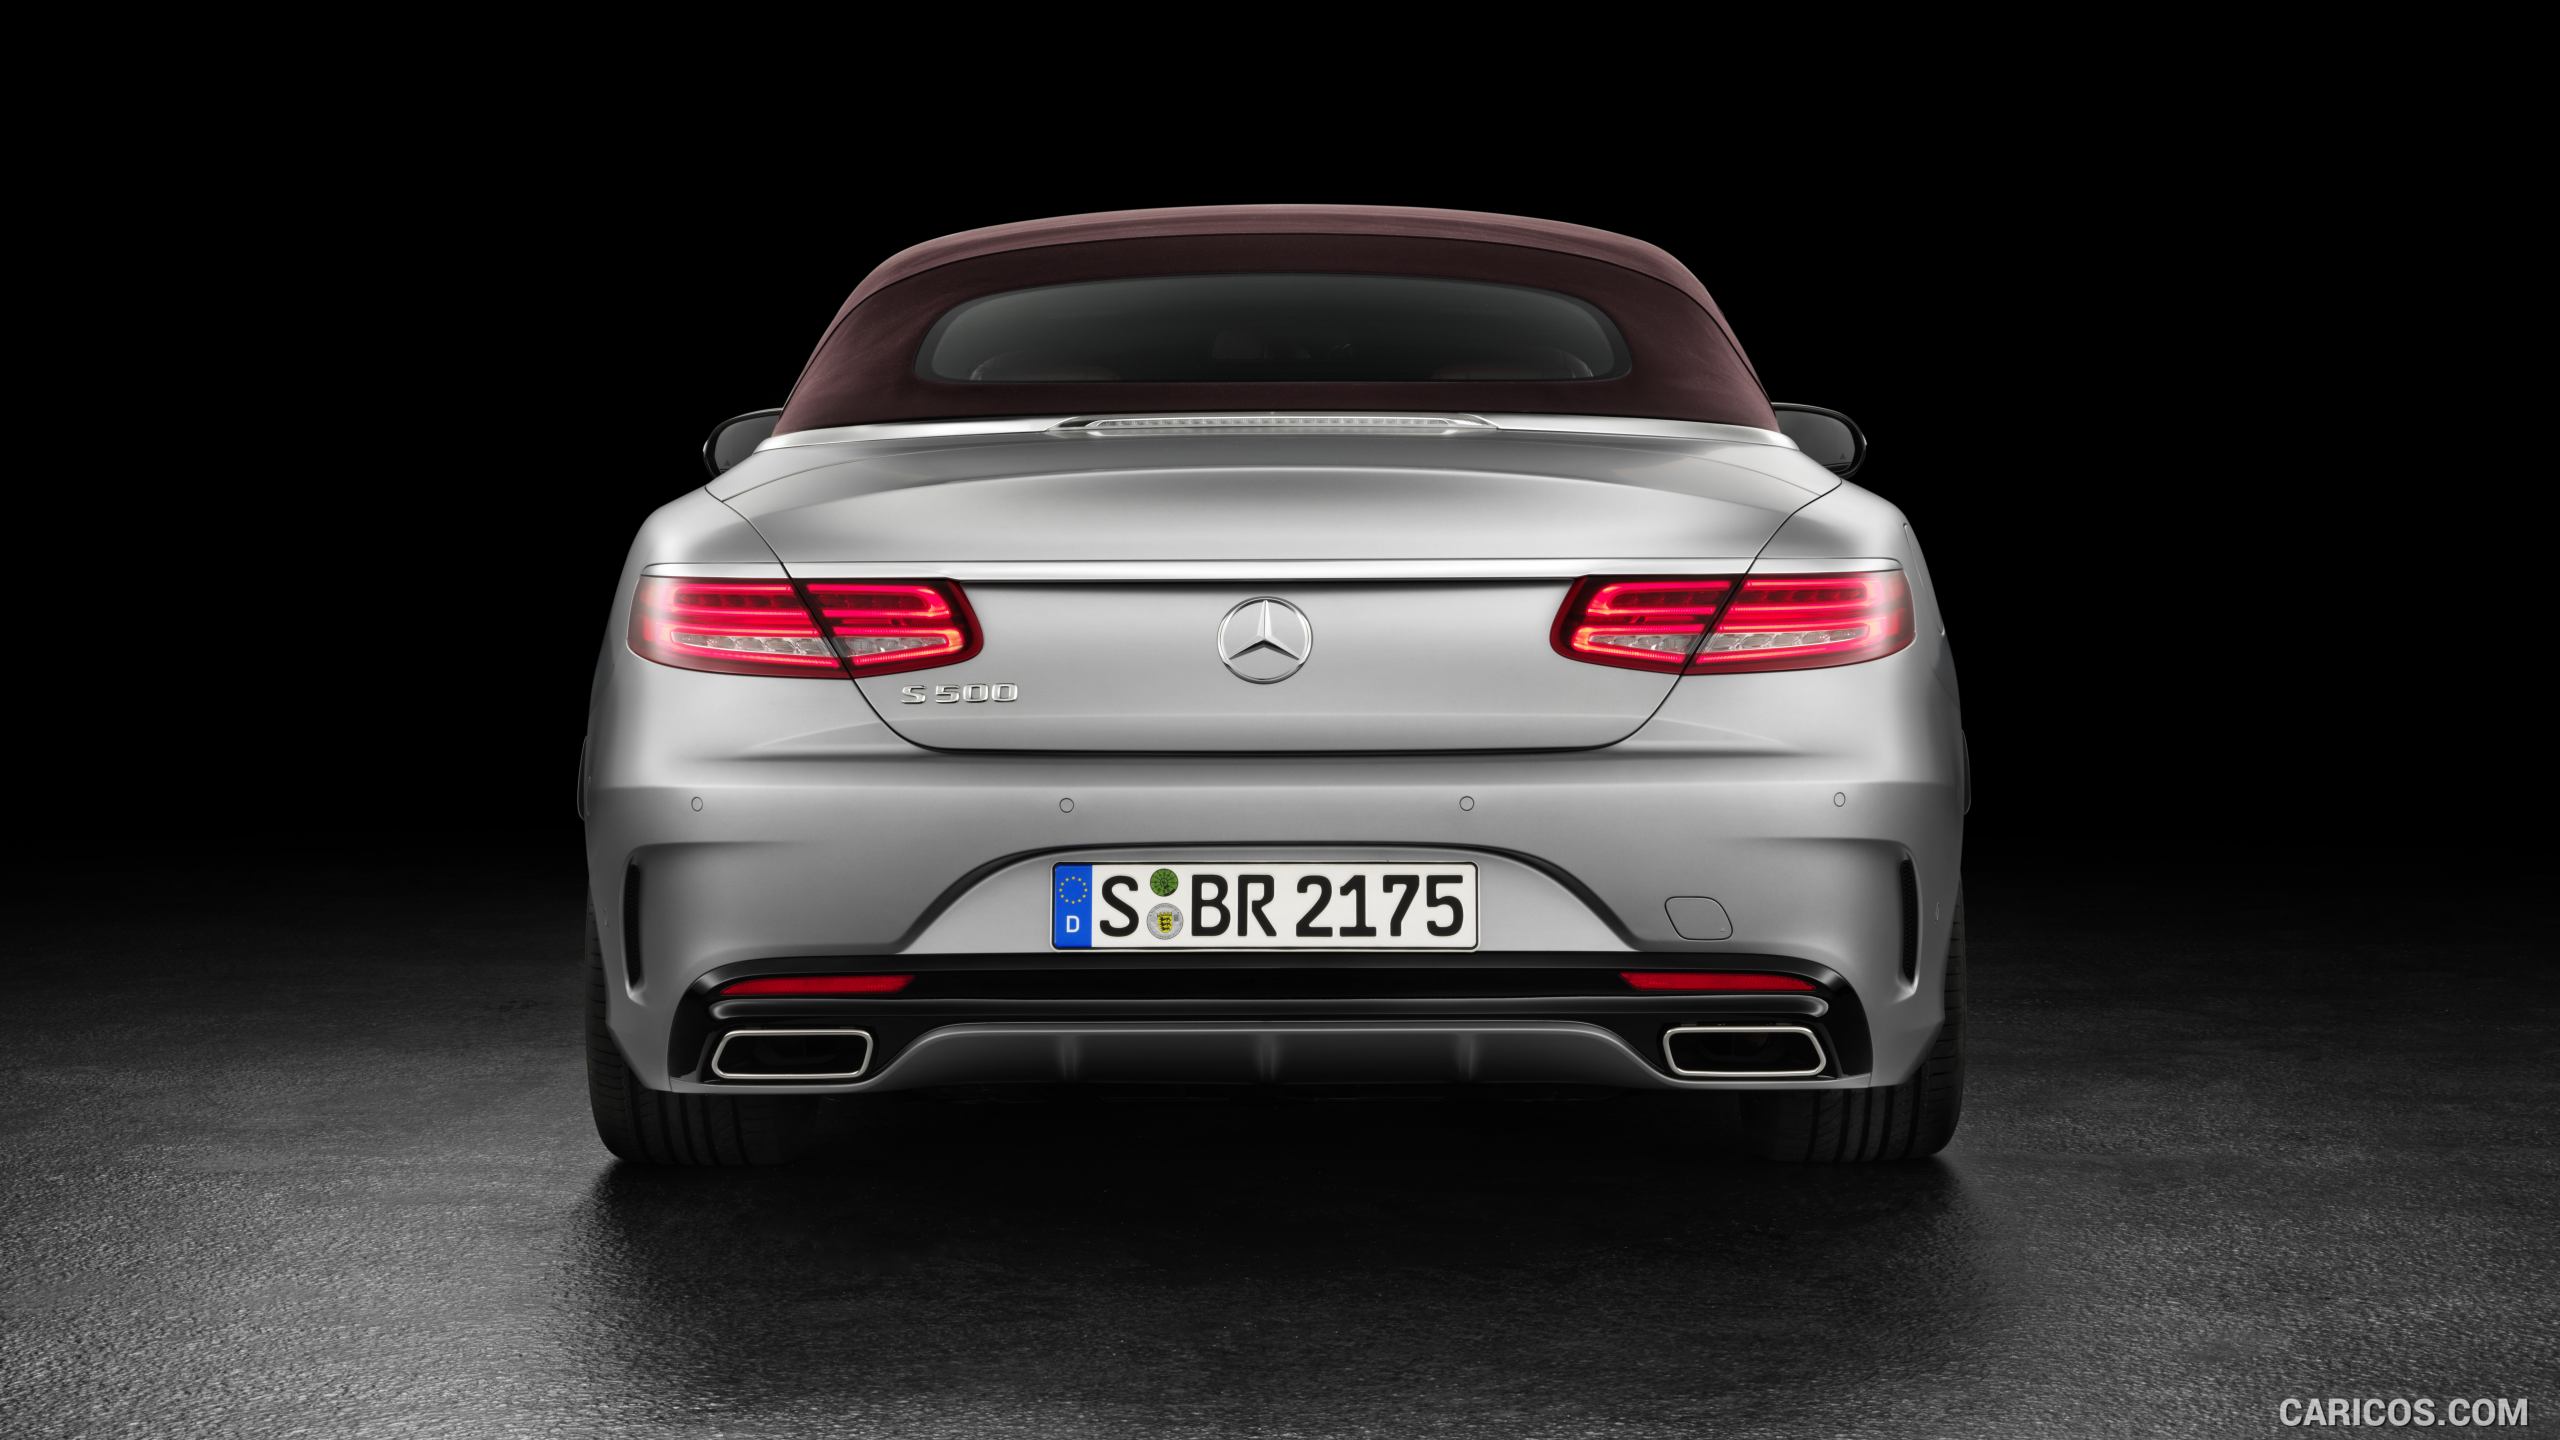 2017 Mercedes-Benz S-Class S500 Cabriolet AMG-line (Alanit Grey Magno) - Rear, #30 of 56